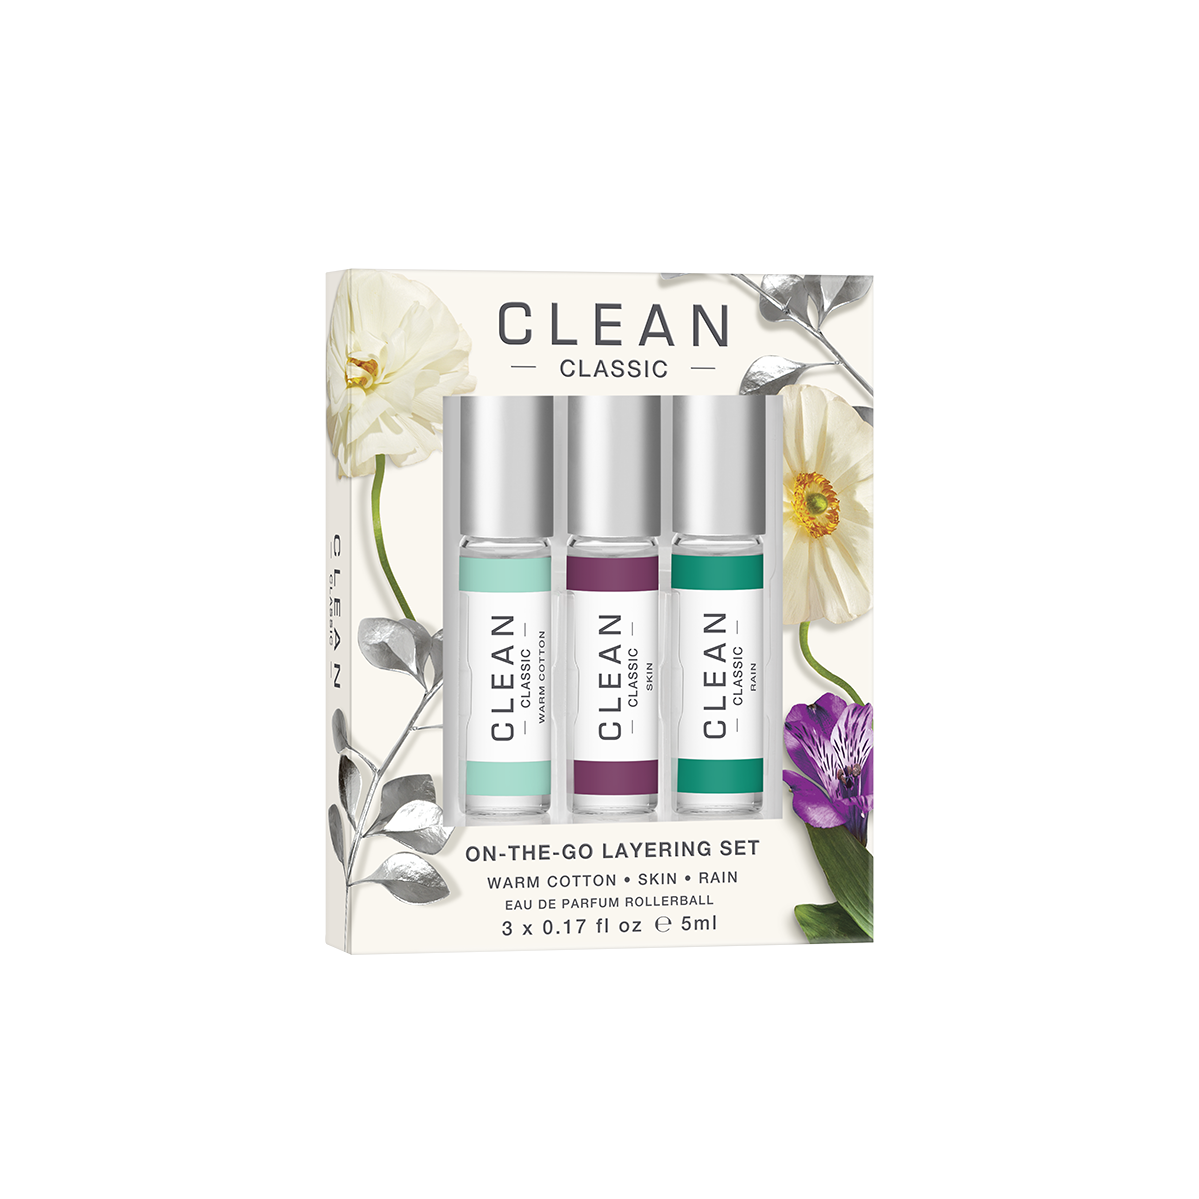 CLEAN CLASSIC On-The-Go Layering Gift Set